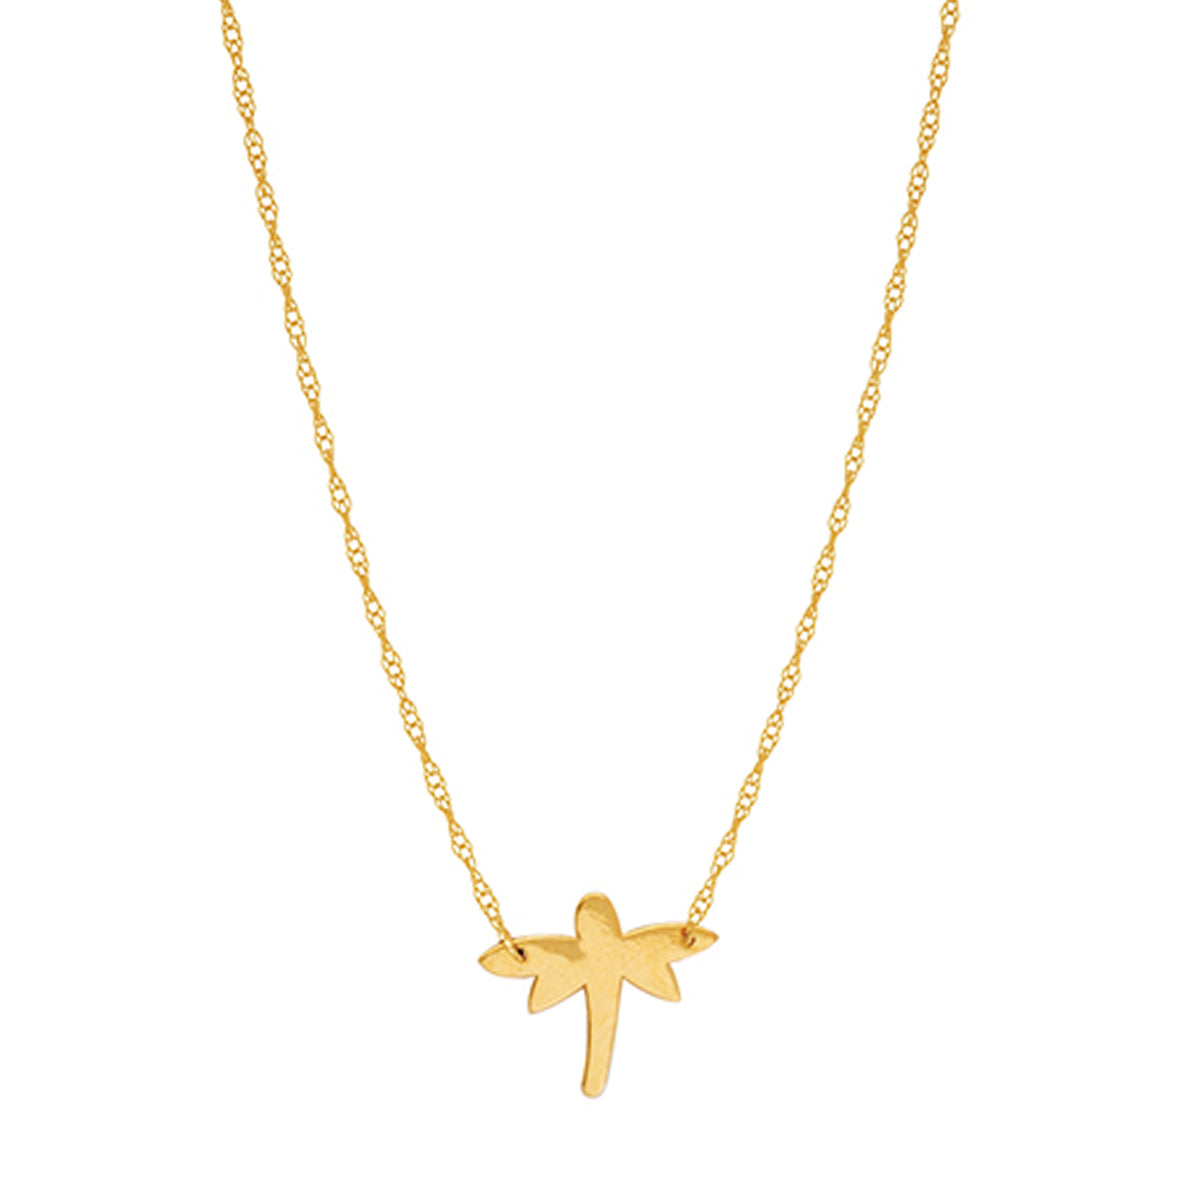 14K Yellow Gold Mini Dragonfly Pendant Necklace, 16" To 18" Adjustable fine designer jewelry for men and women